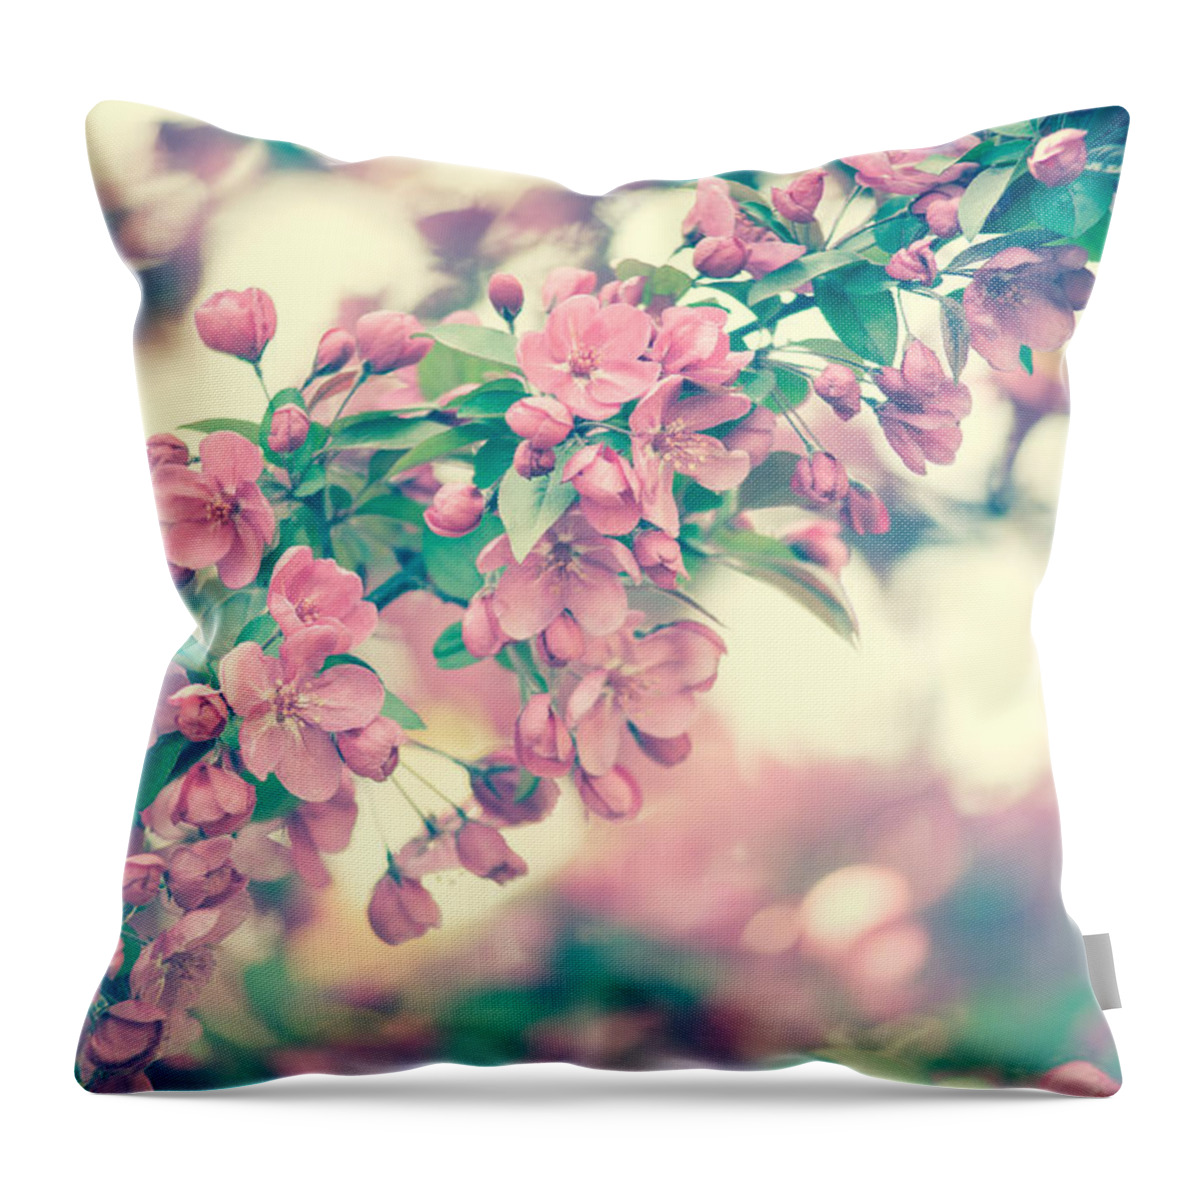 Spring Throw Pillow featuring the photograph Cherry Blossom by Zina Zinchik